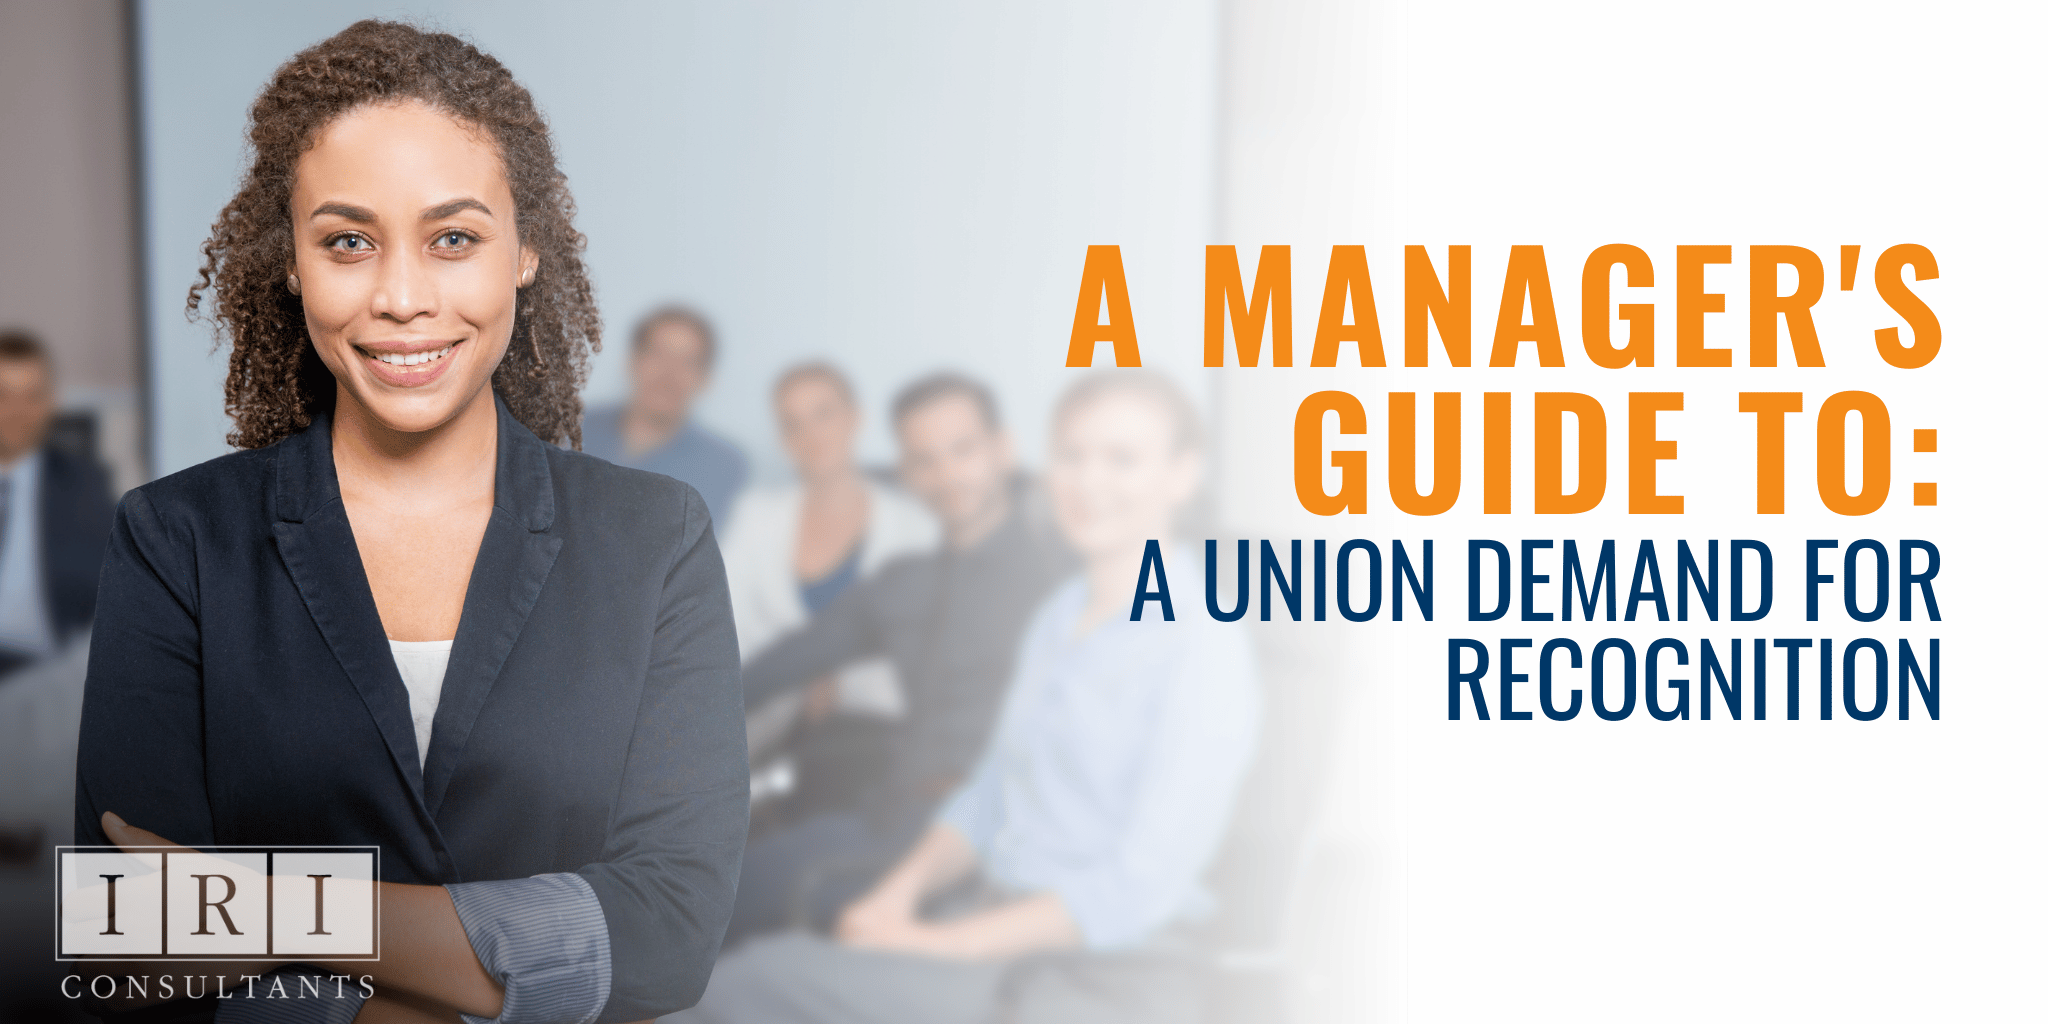 A Manager's Guide To A Union Demand For Recognition